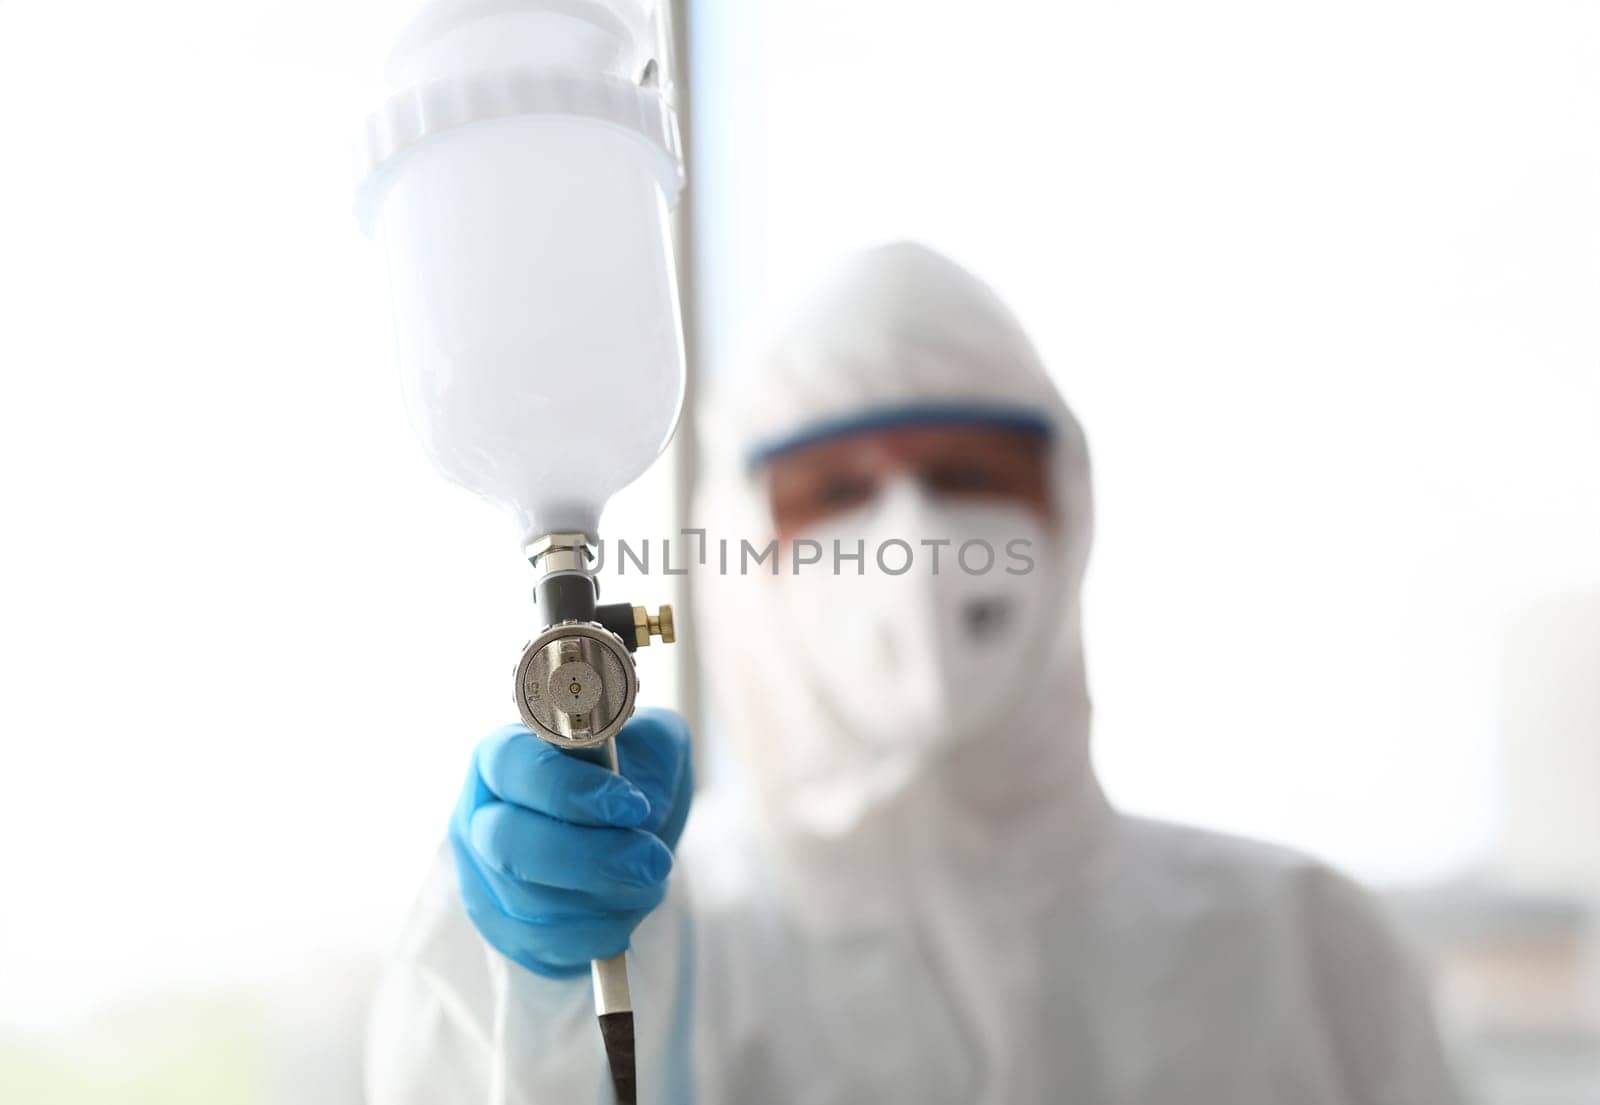 Workman hold in hand sprayer wearing protective suit by kuprevich